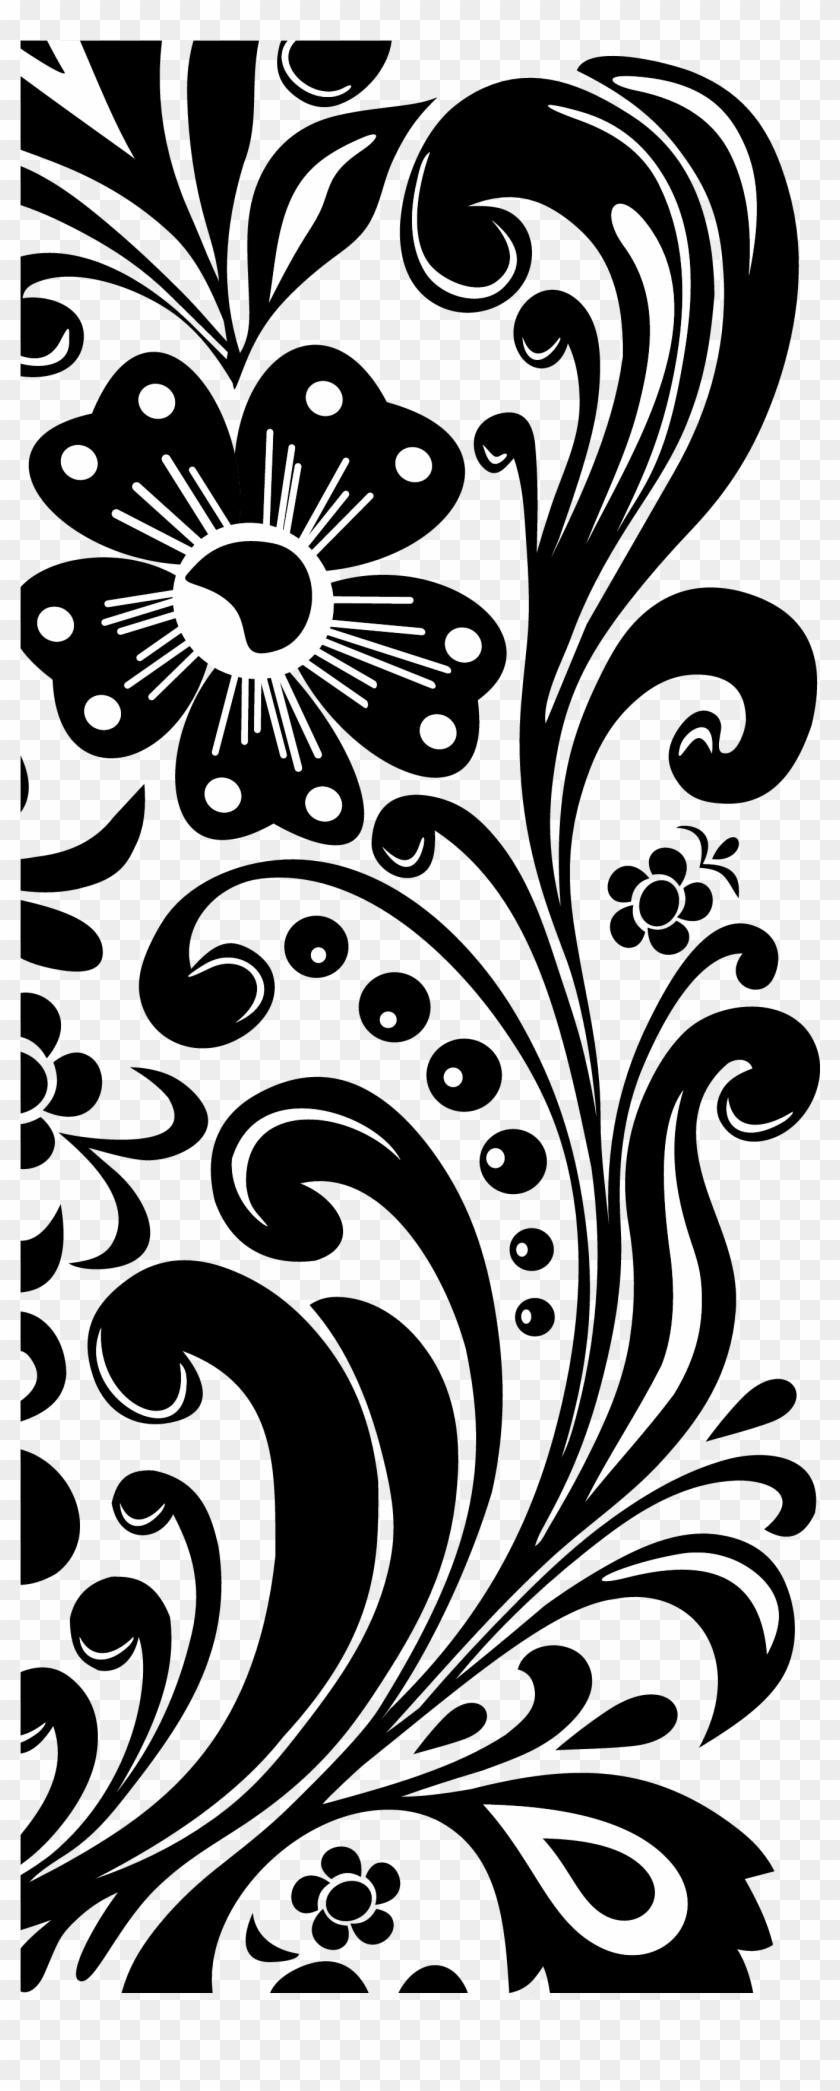 Index Of /hp - Flowers Border Line Art Clipart